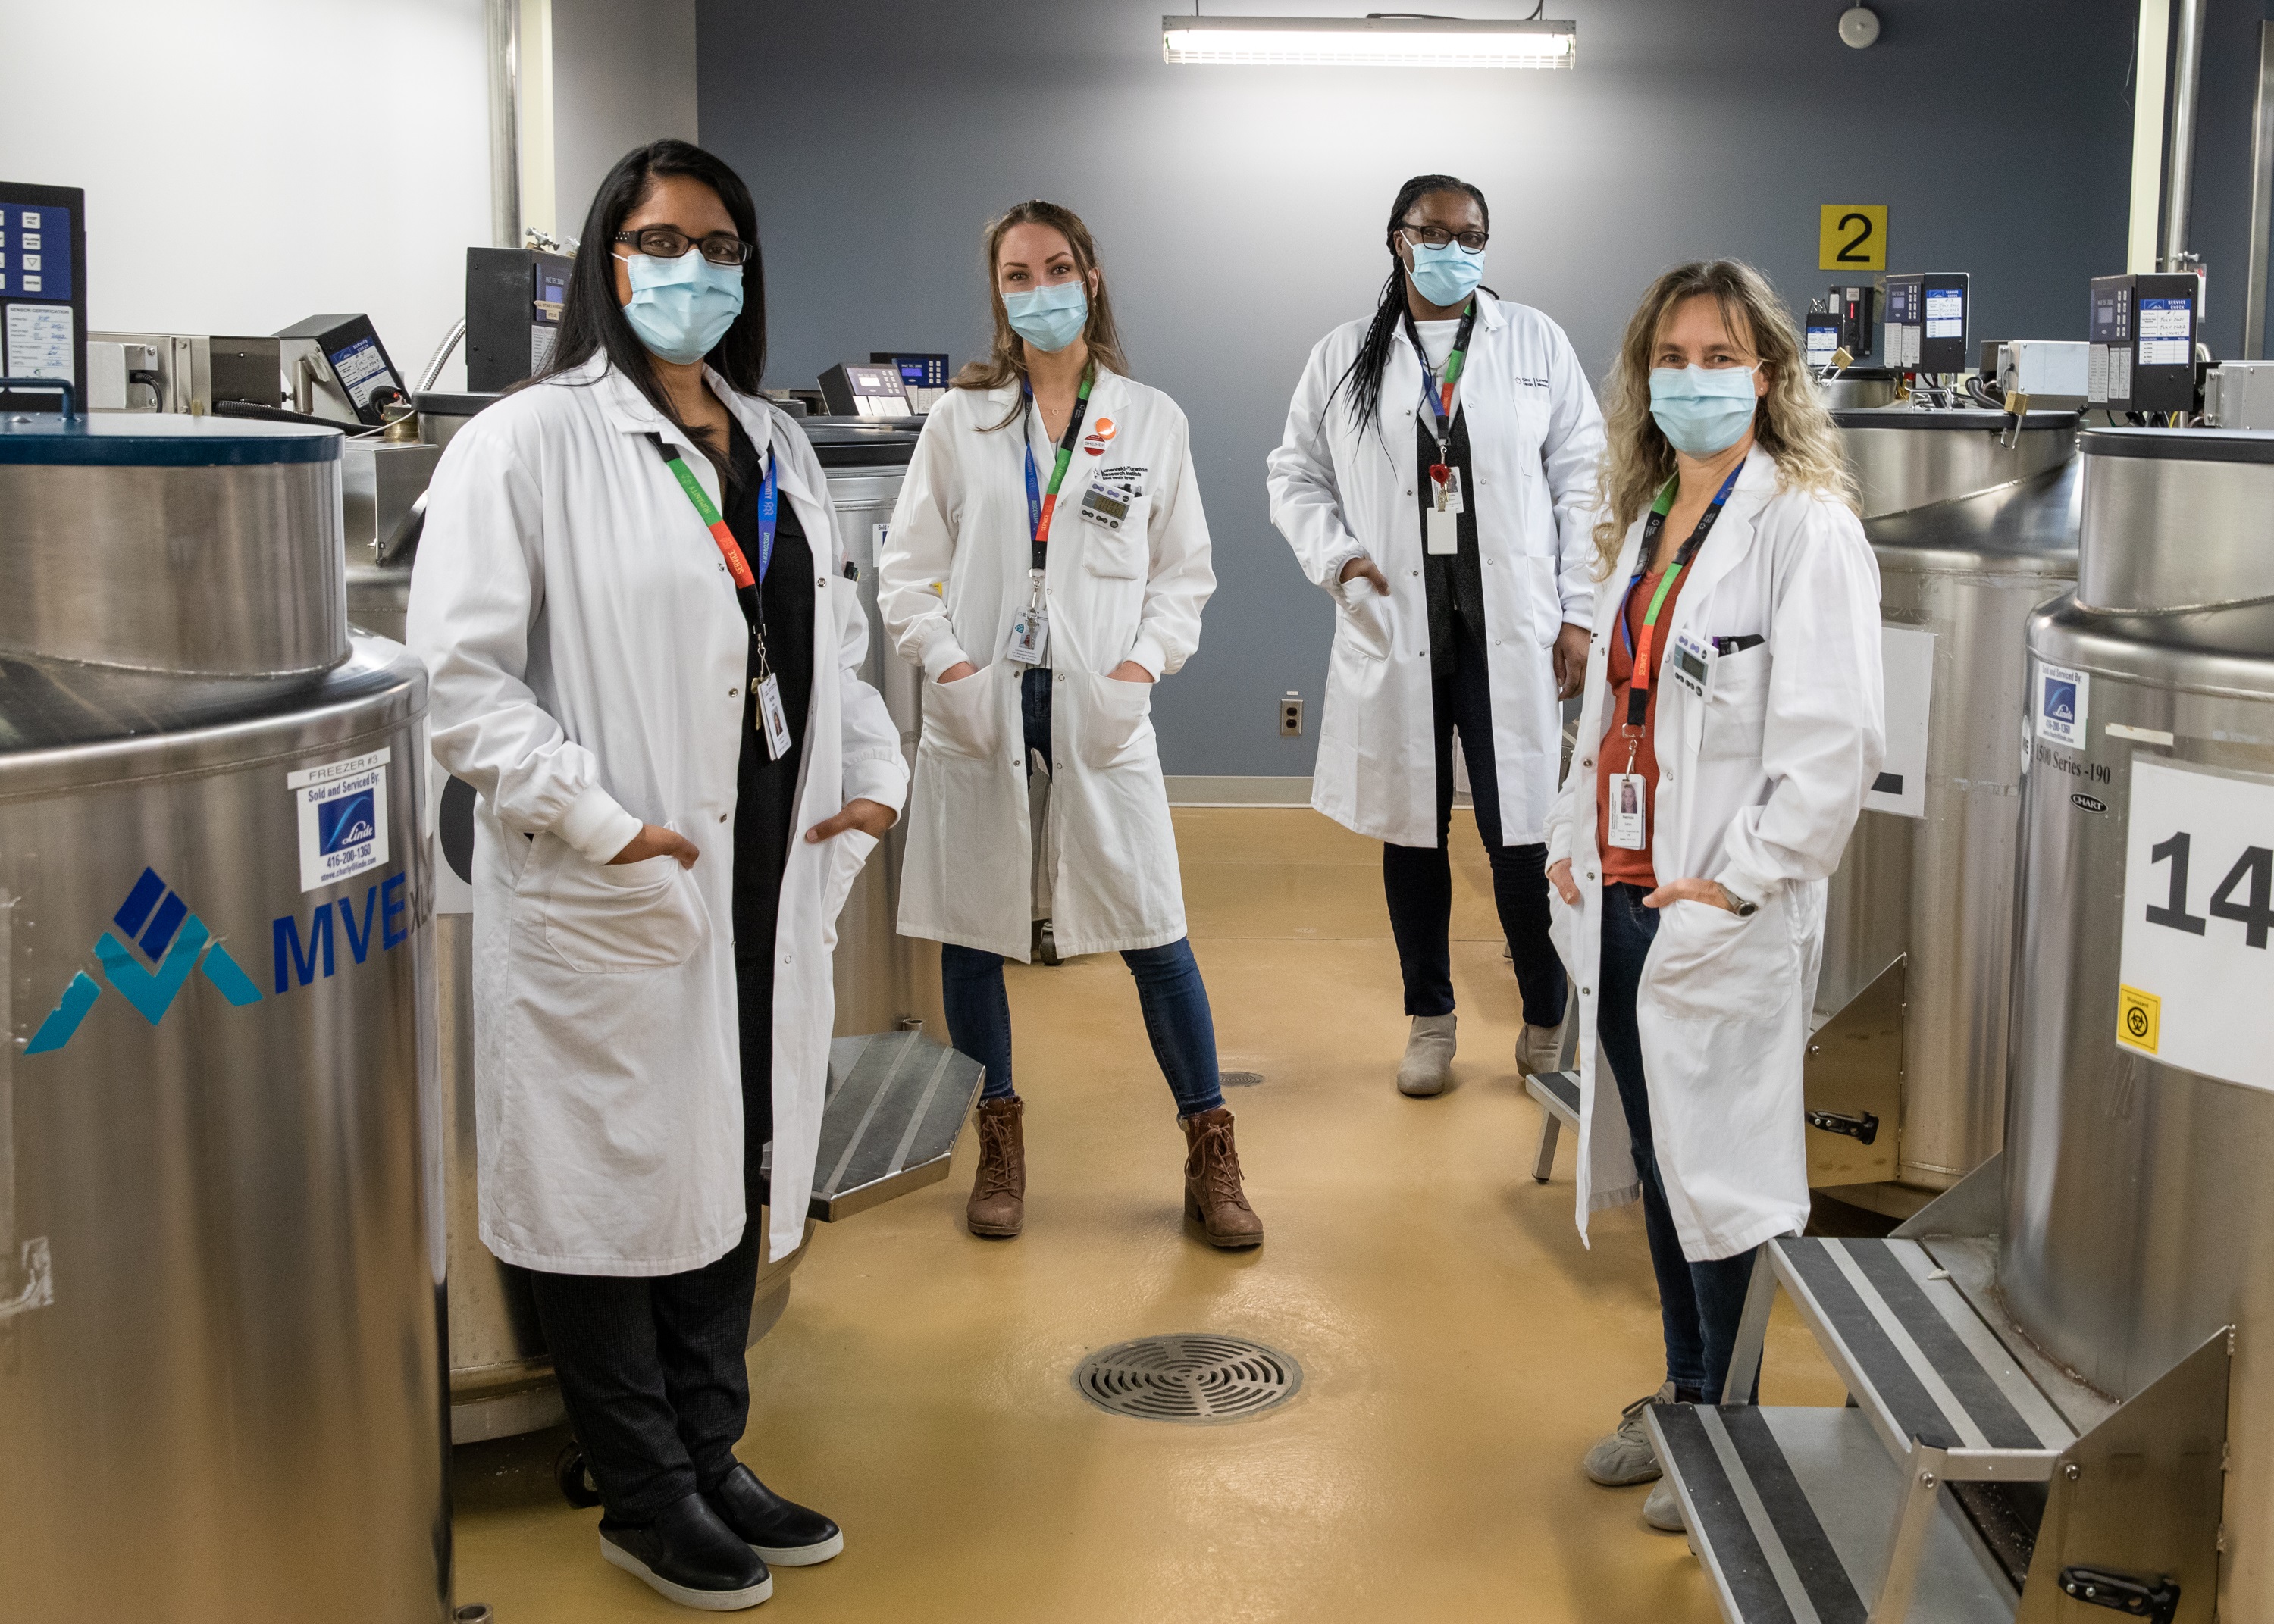 A group of women who are laboratory professionals stand in in a room containing large steel vats.